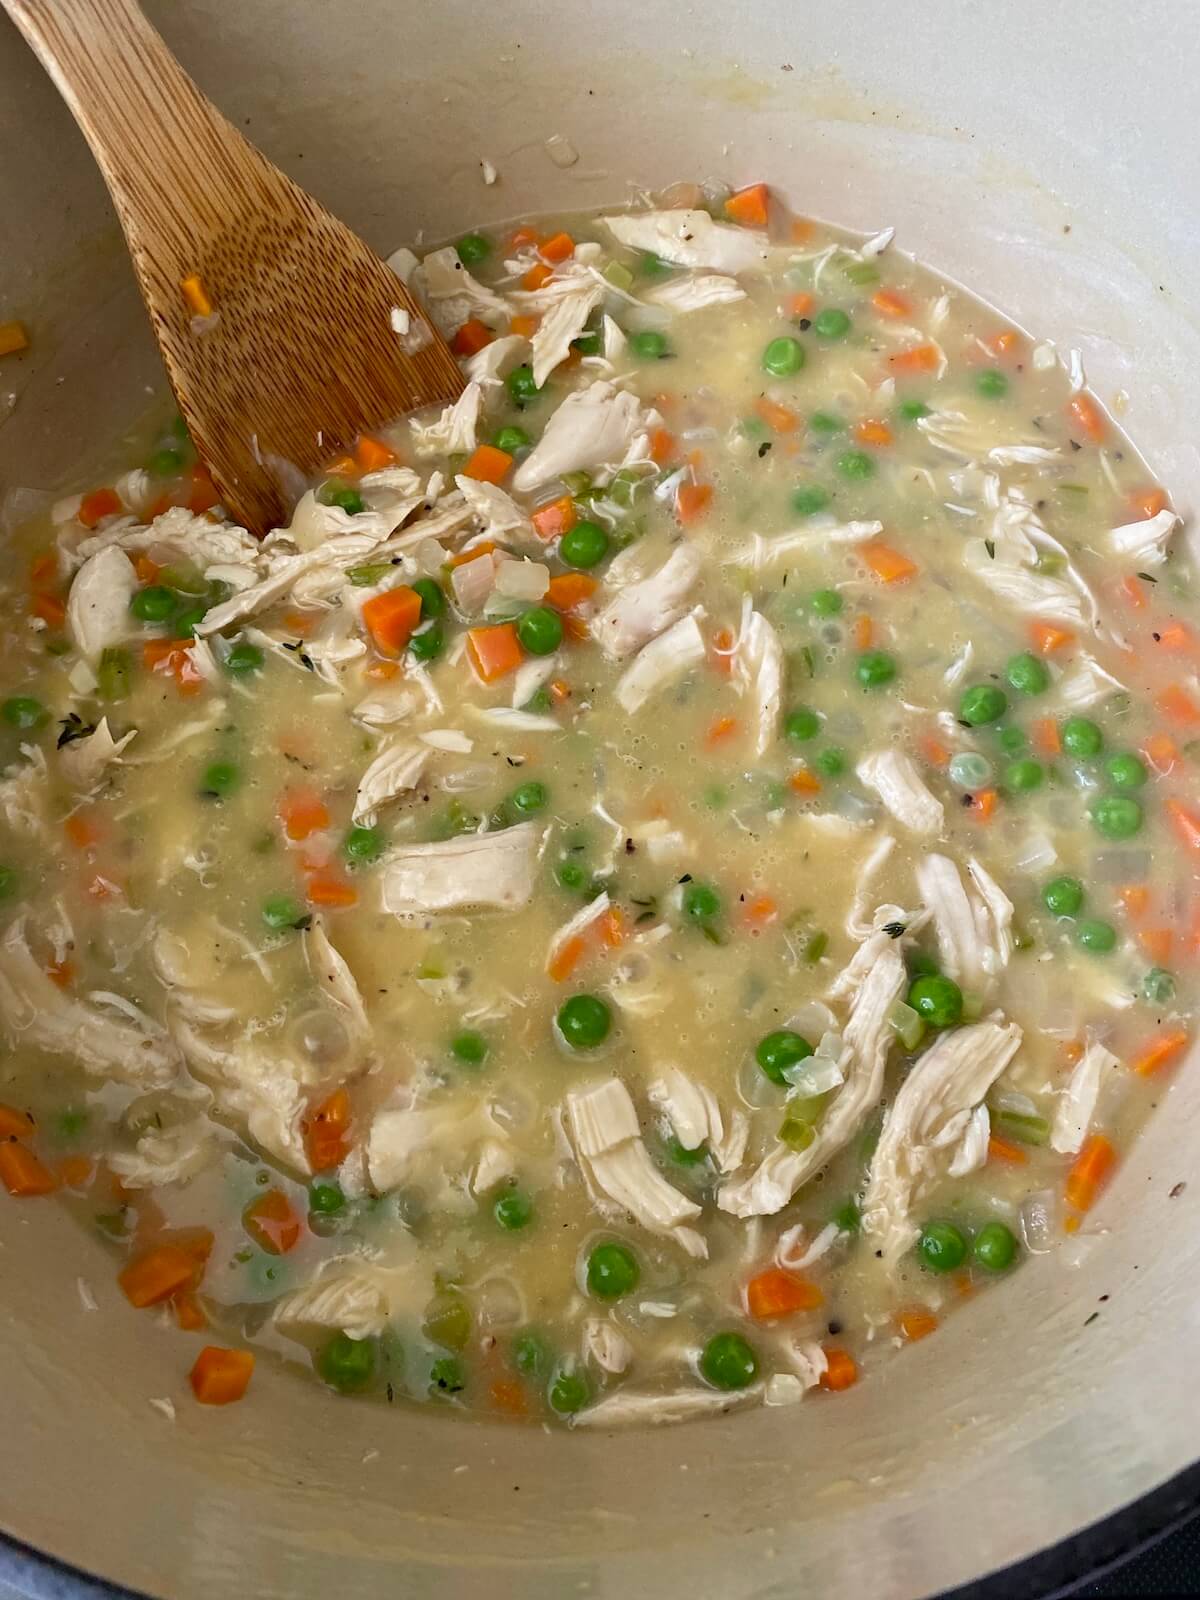 The finished chicken pot pie filling inside a dutch oven pot. There is a wooden spoon sticking out of the pot to the left.